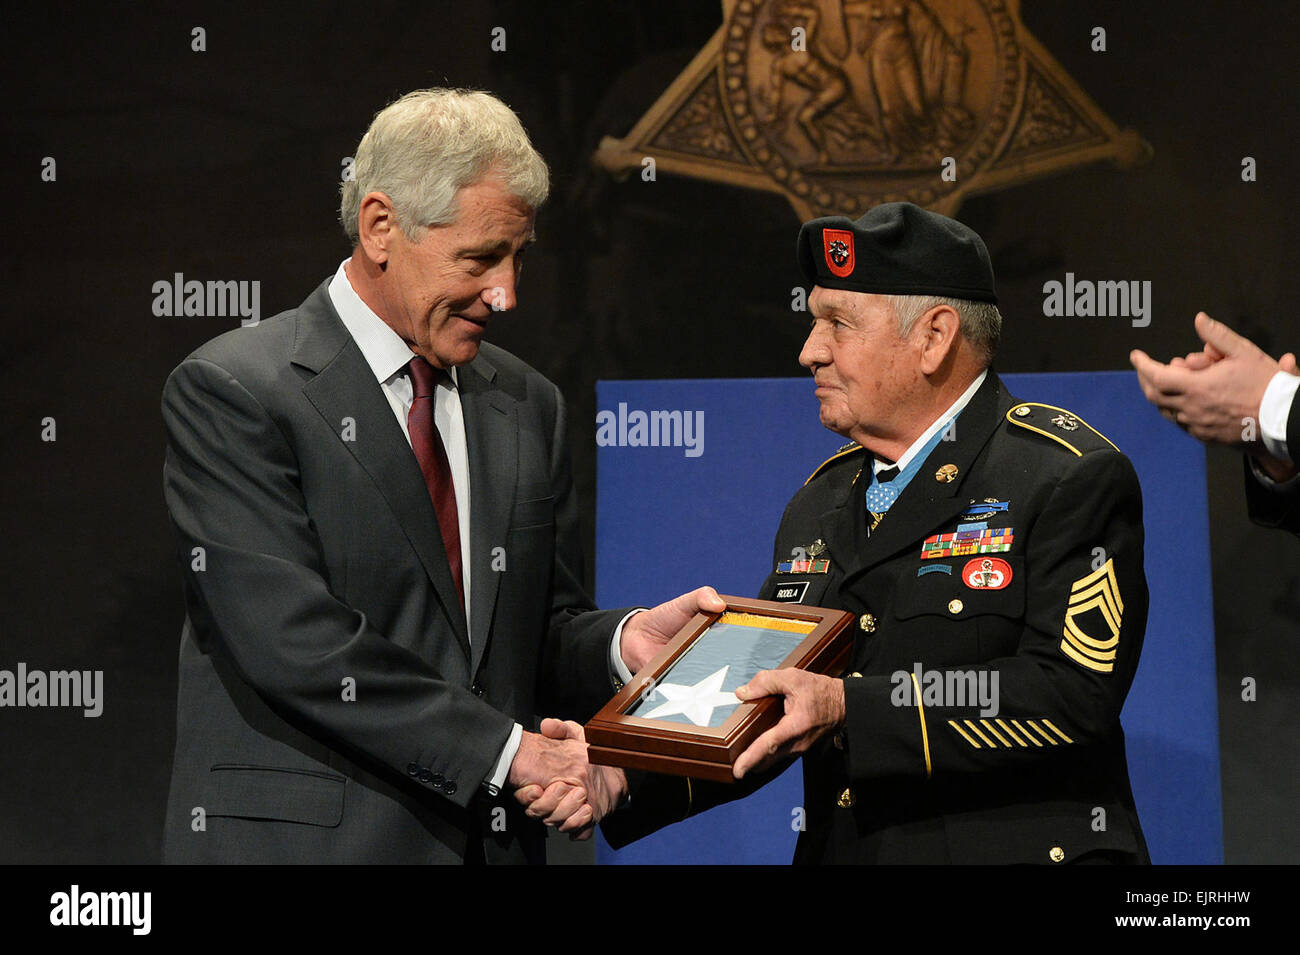 Sgt.1st Class Jose Rodela is presented the Medal of Honor Flag by Secretary of Defense Chuck Hagel after being inducted into the Hall of Heroes during a ceremony at the Pentagon, Washington D.C., March 19, 2014. Rodela distinguished himself for his valorous actions on Sept. 1, 1969, while serving as the company commander in Phuoc Long Province, Vietnam.  Mr. Leroy Council Stock Photo